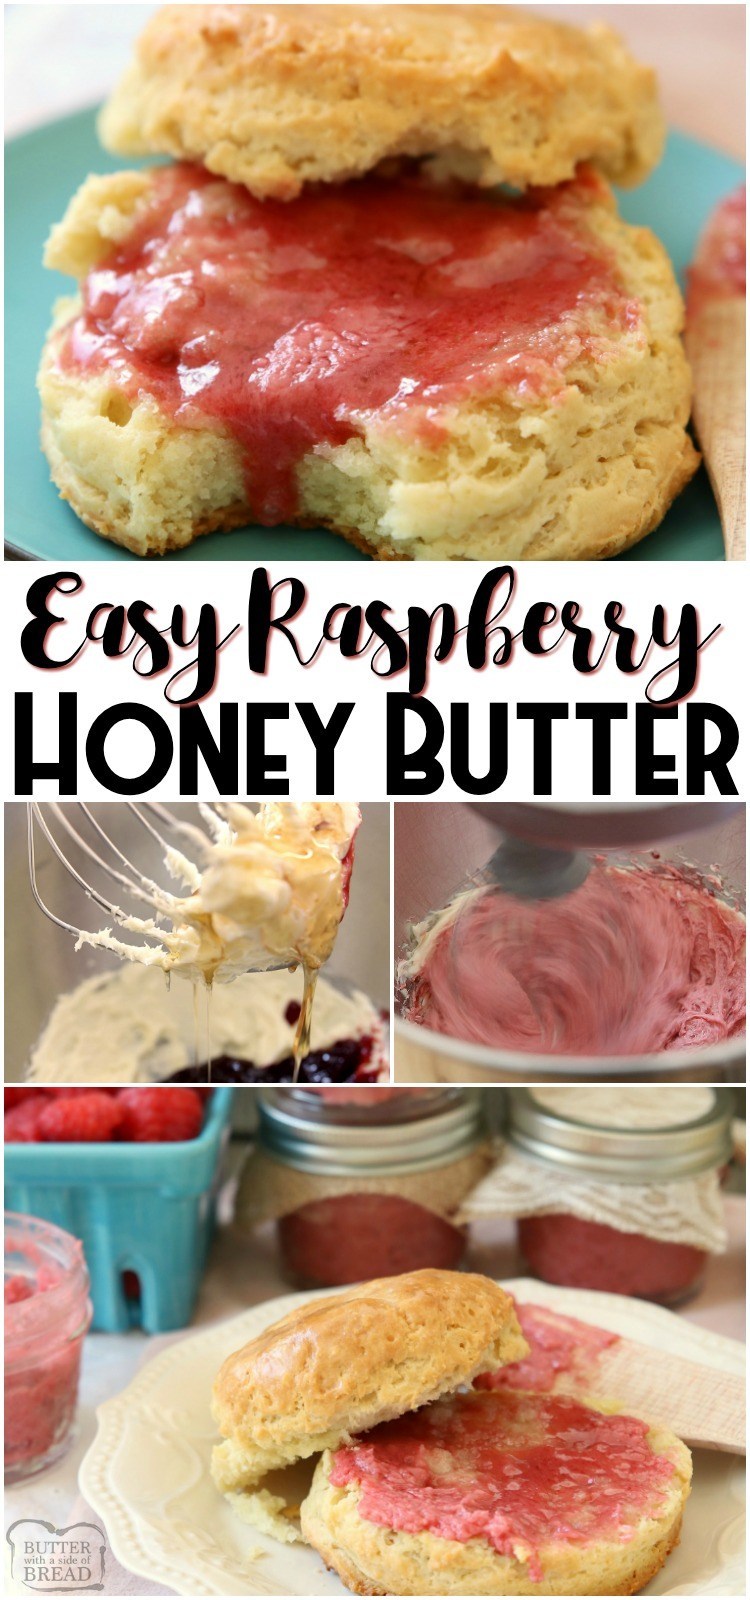 Raspberry Honey Butter recipe with just 4 ingredients and is blow-your-mind delicious! Simple honey butter recipe that's smooth, creamy and has great flavor. #butter #honeybutter #honey #raspberry #homemade #bread #spread #recipe from BUTTER WITH A SIDE OF BREAD